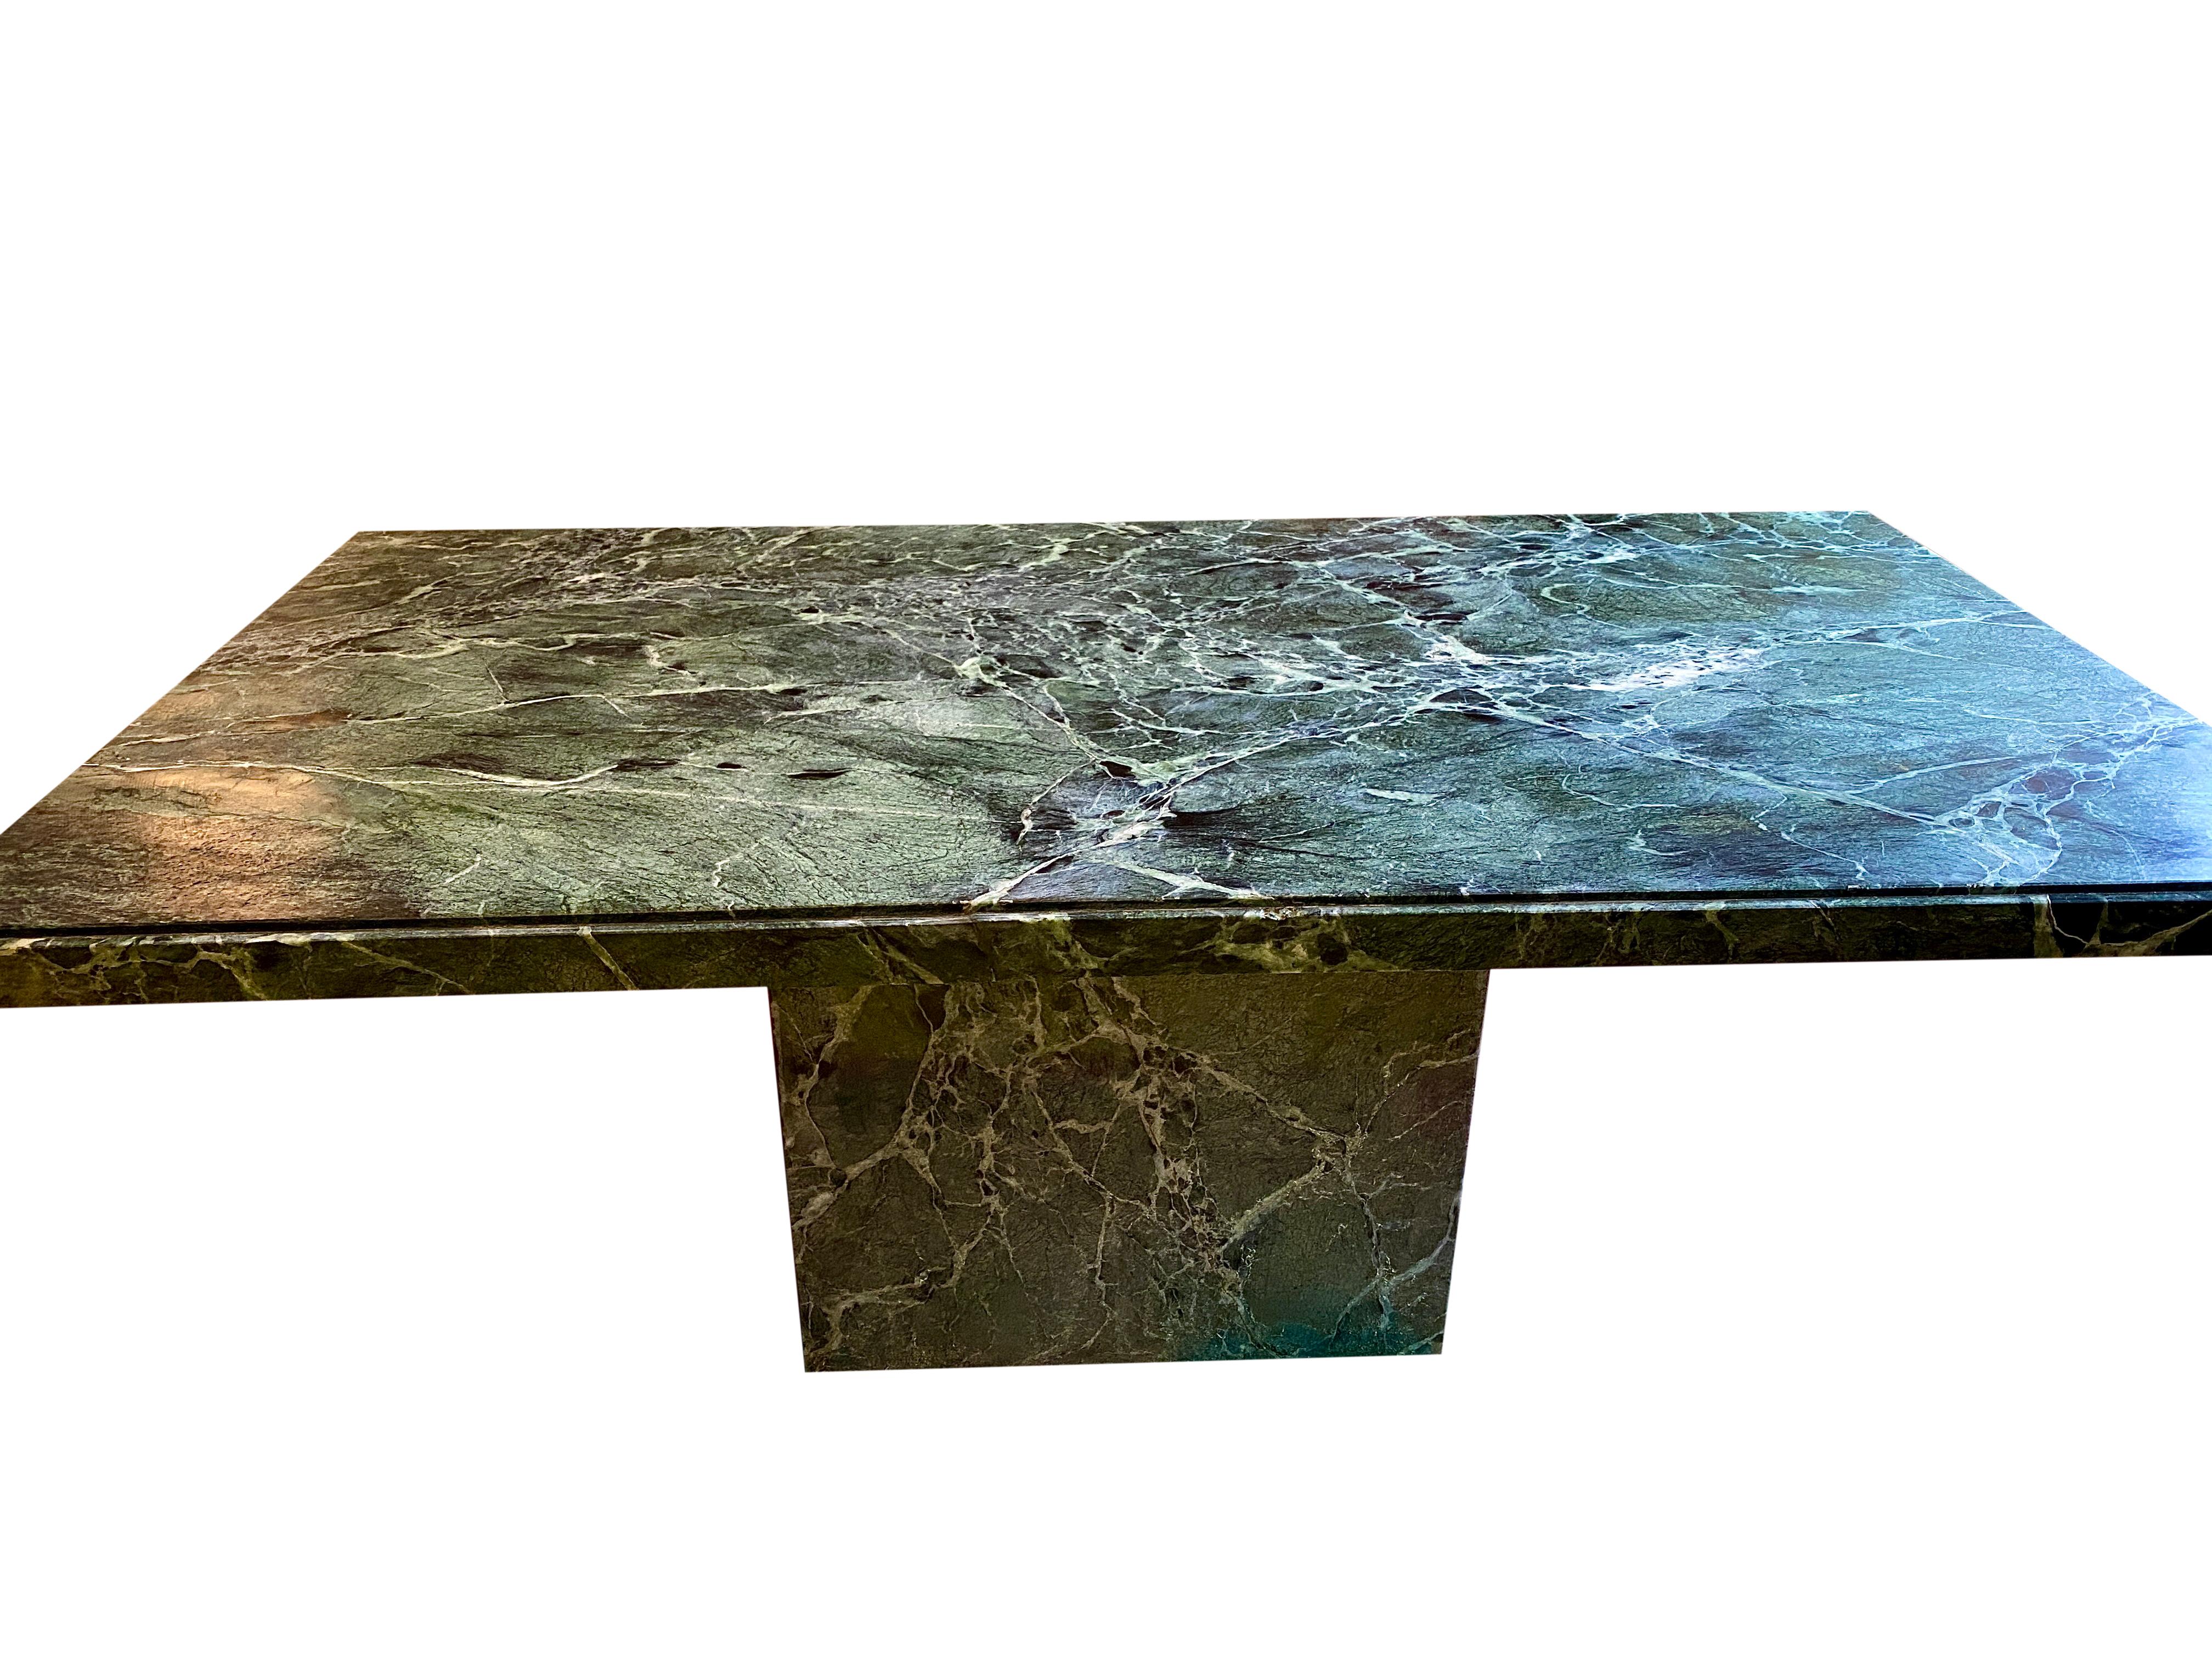 Stunning vintage Italian green marble dining table, made in Italy, circa the 1980s. In excellent vintage condition. Solid marble rectangular base. The solid marble top is 3